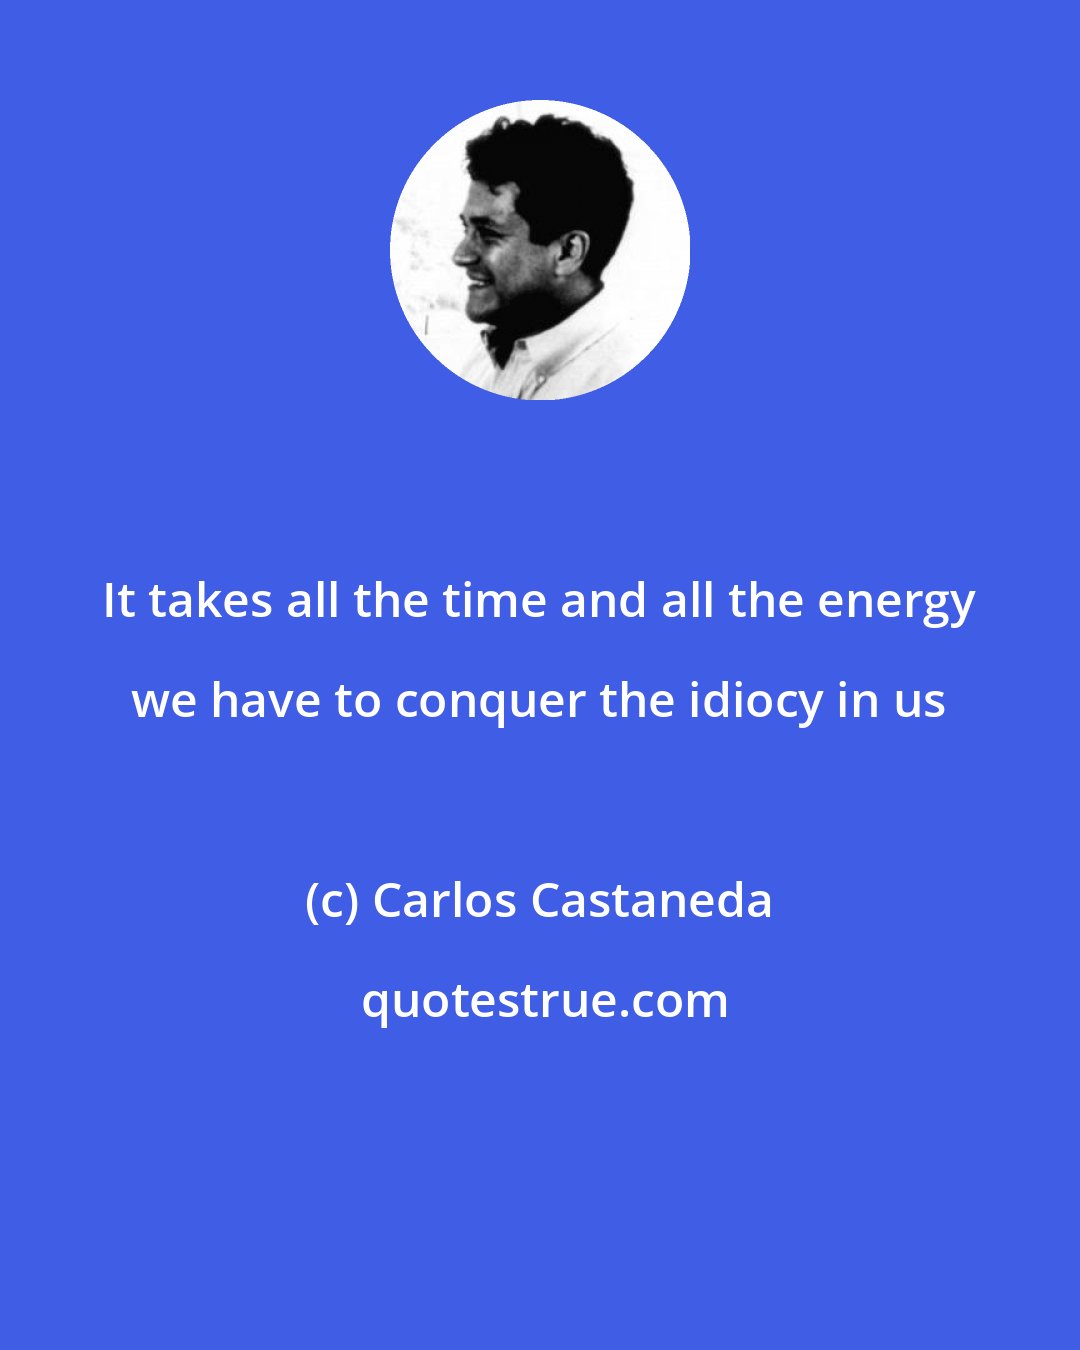 Carlos Castaneda: It takes all the time and all the energy we have to conquer the idiocy in us